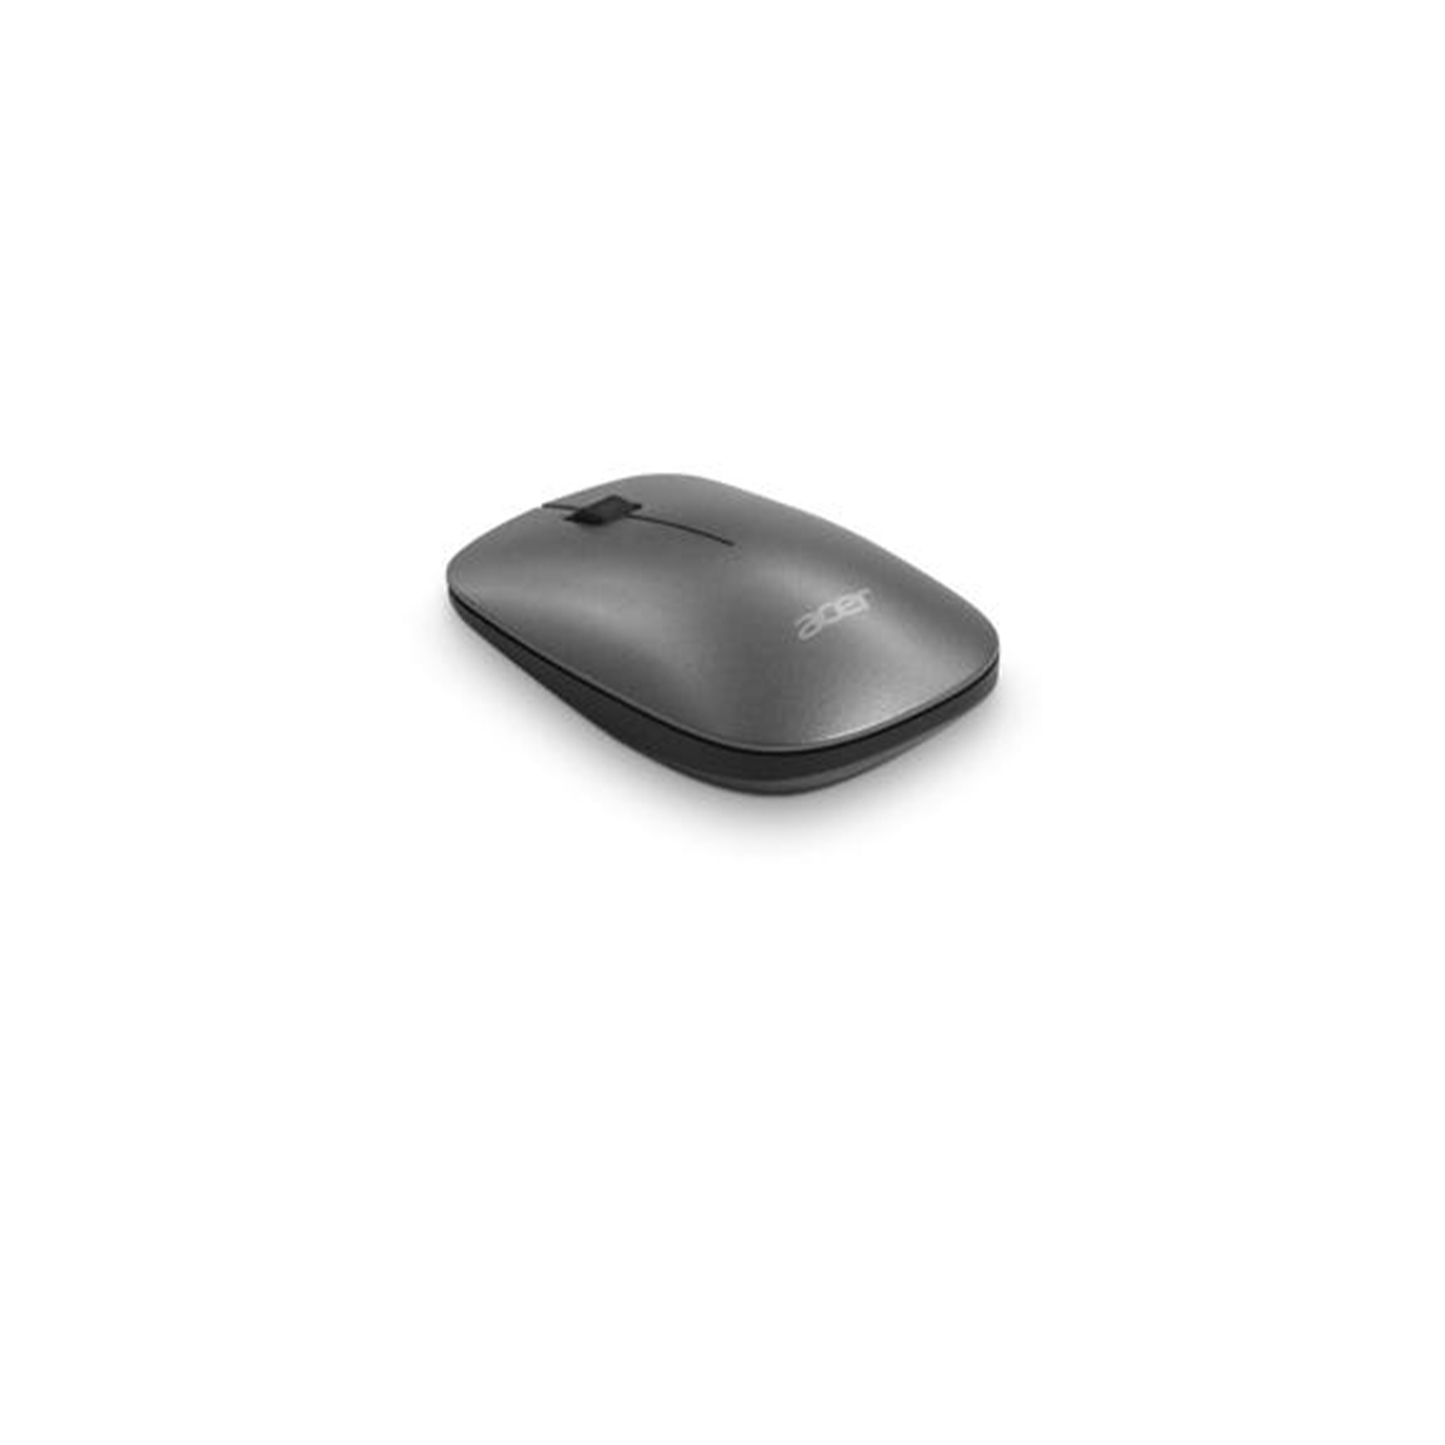 Acer Wireless Optical Slim Mouse